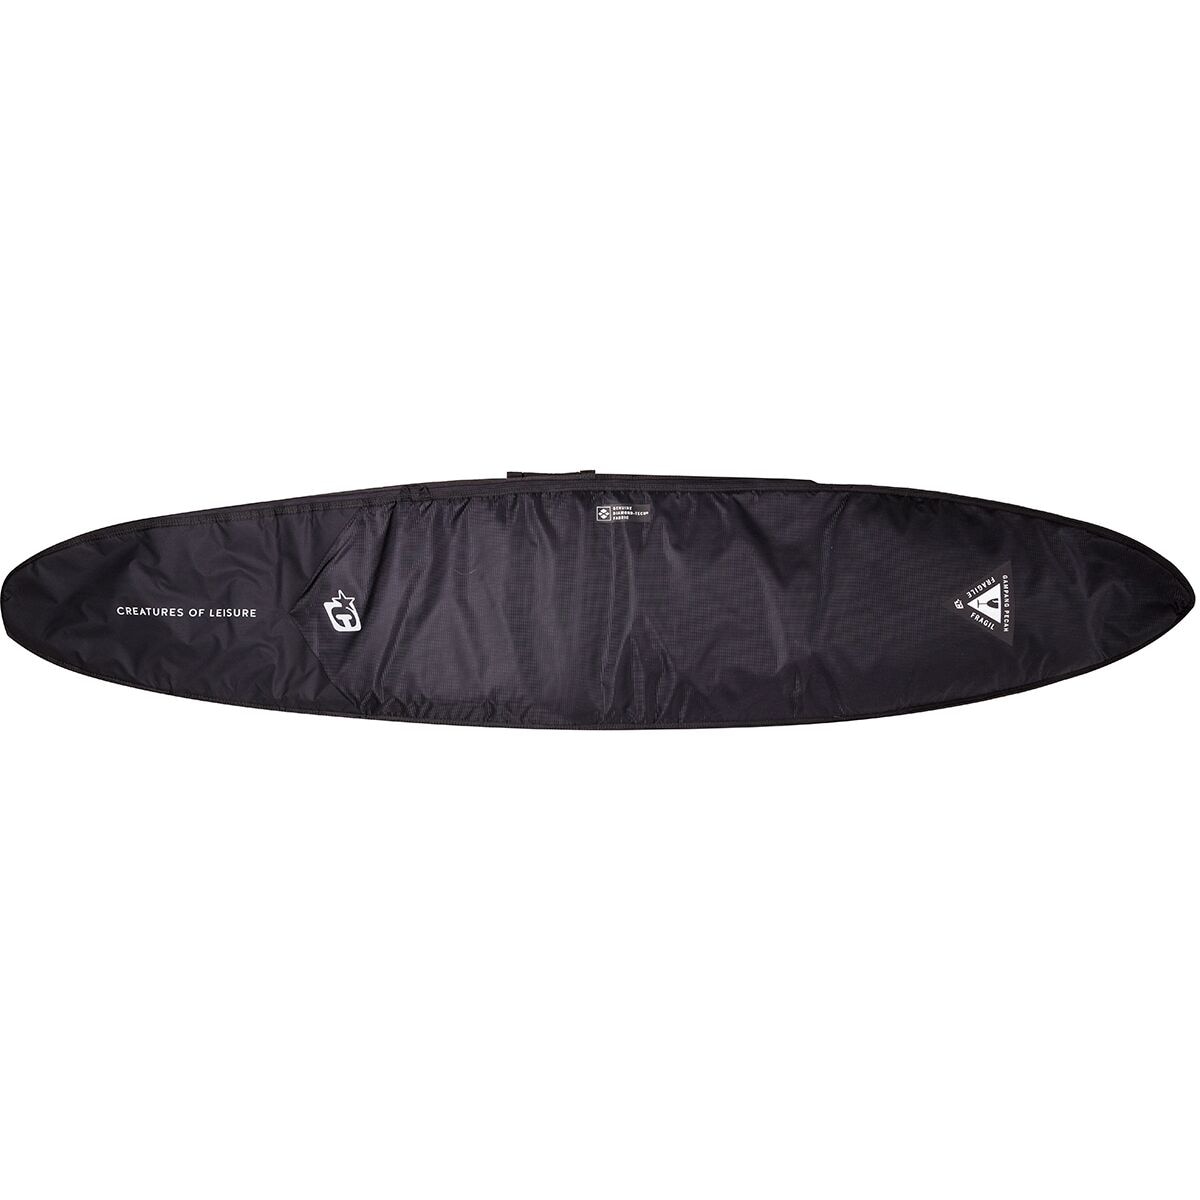 Creatures of Leisure Gun Day Use Surfboard Bag